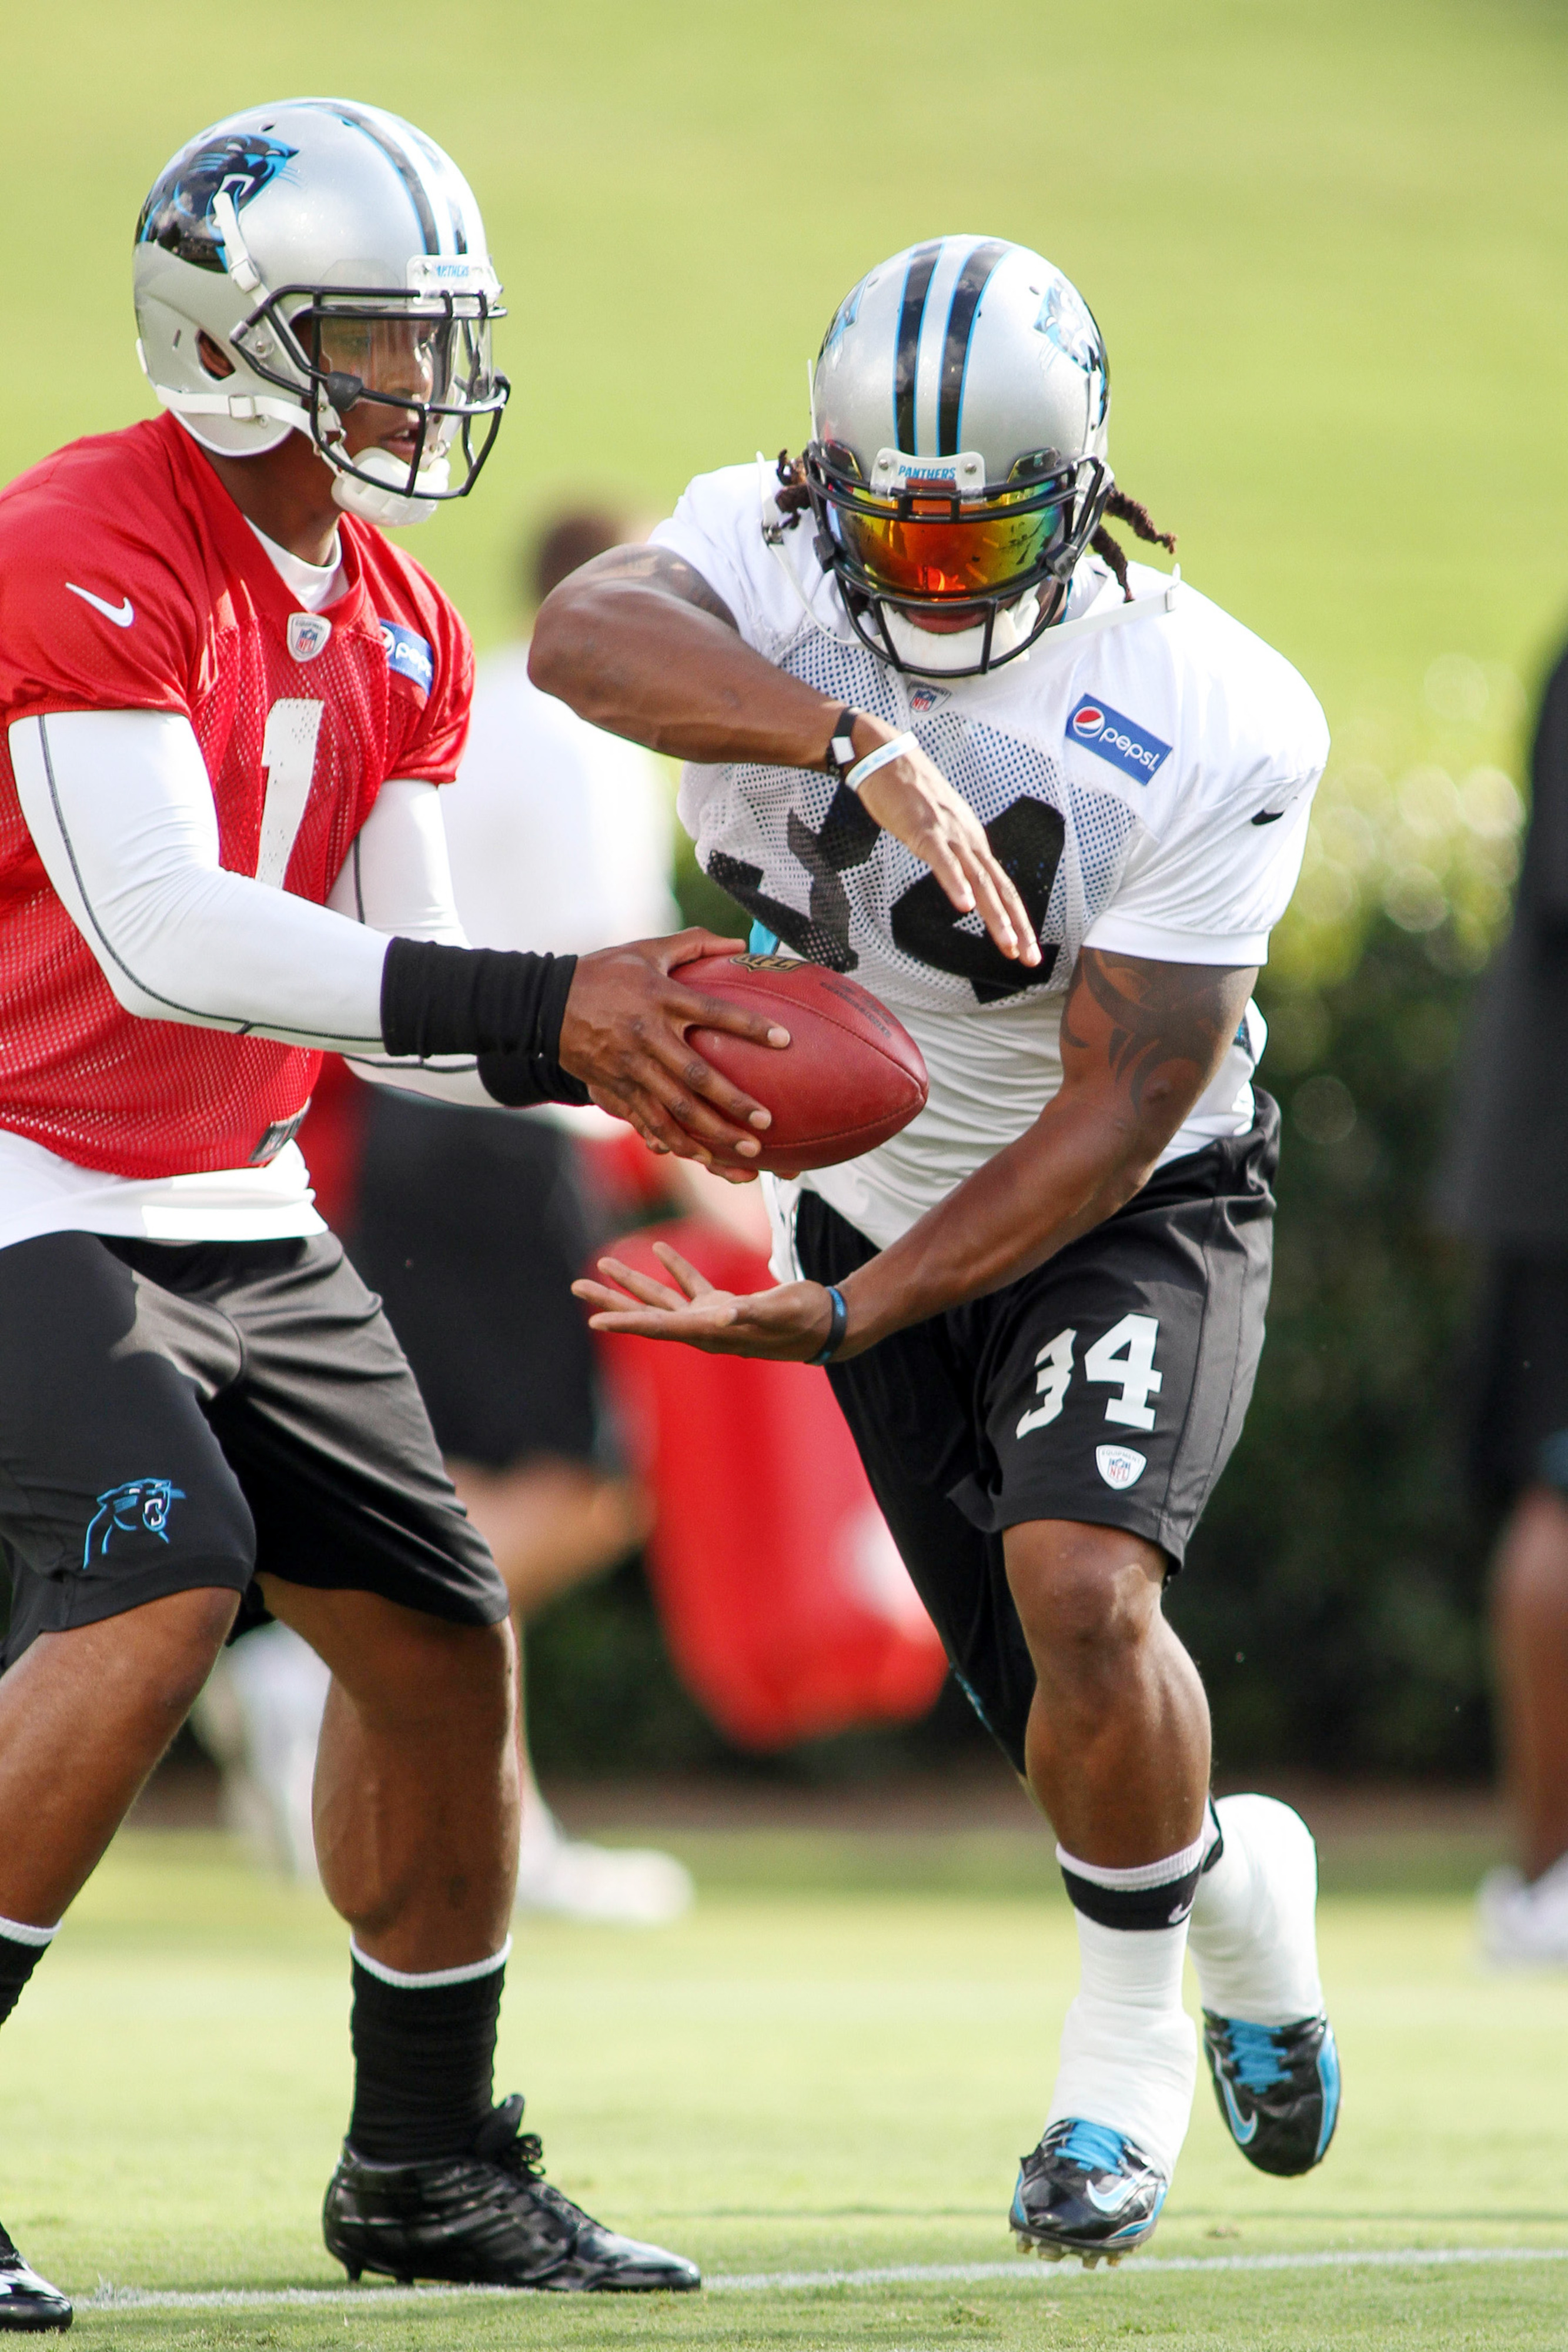 Jul 28, 2012; Spartanburg, SC USA. Carolina Panthers running back DeAngelo Williams (34) takes a handoff during the training camp held at Wofford College. Mandatory Credit: Jeremy Brevard-US PRESSWIRE